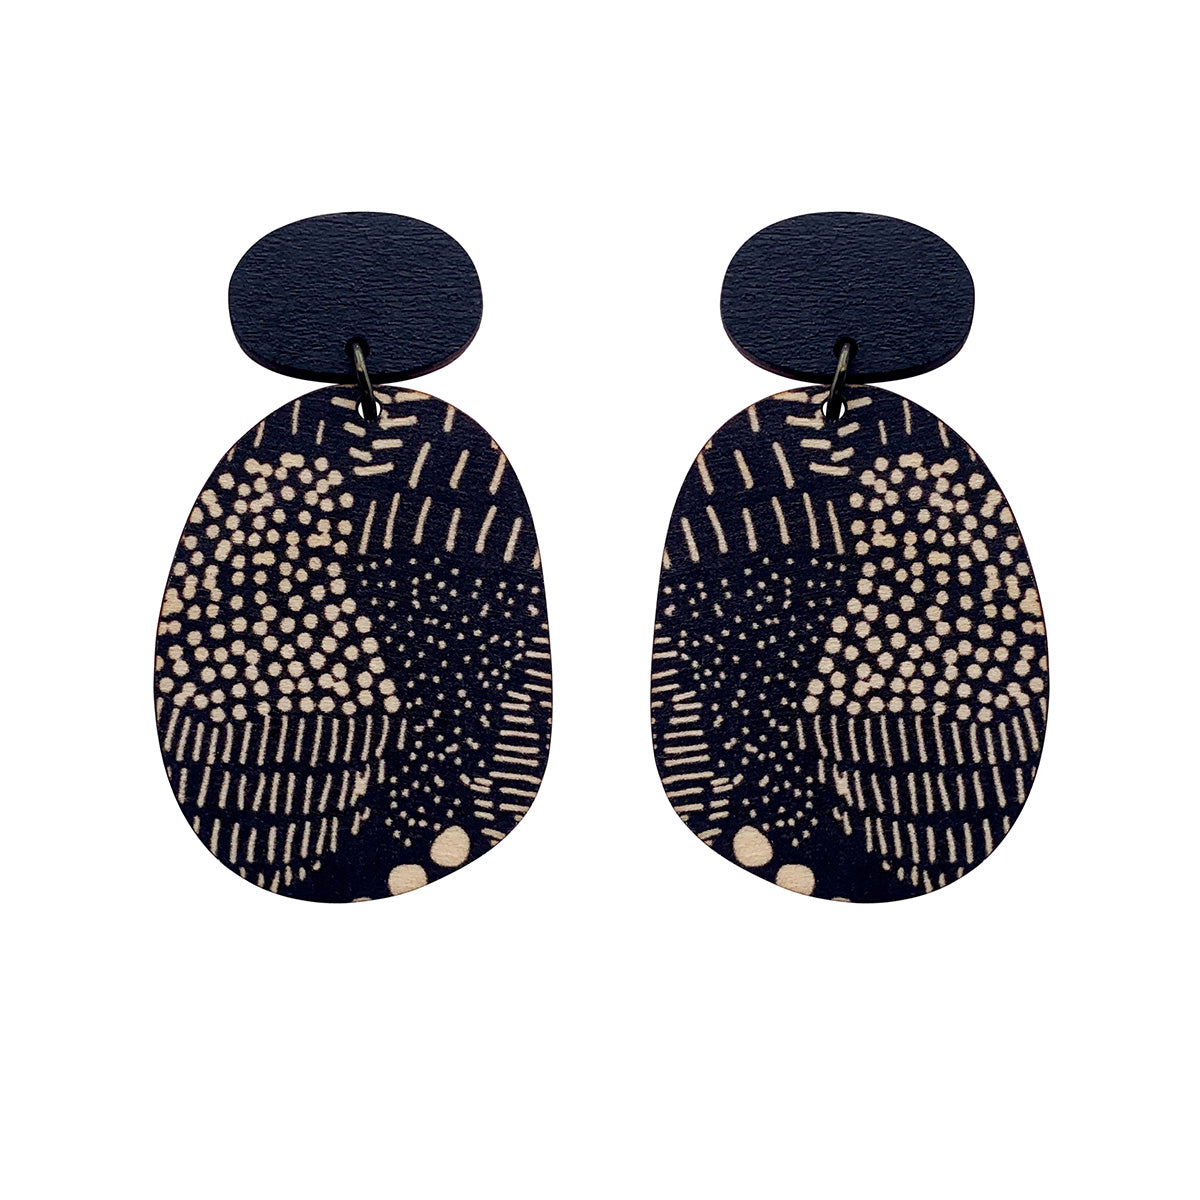 Double layer earrings in black and Night Garden pattern